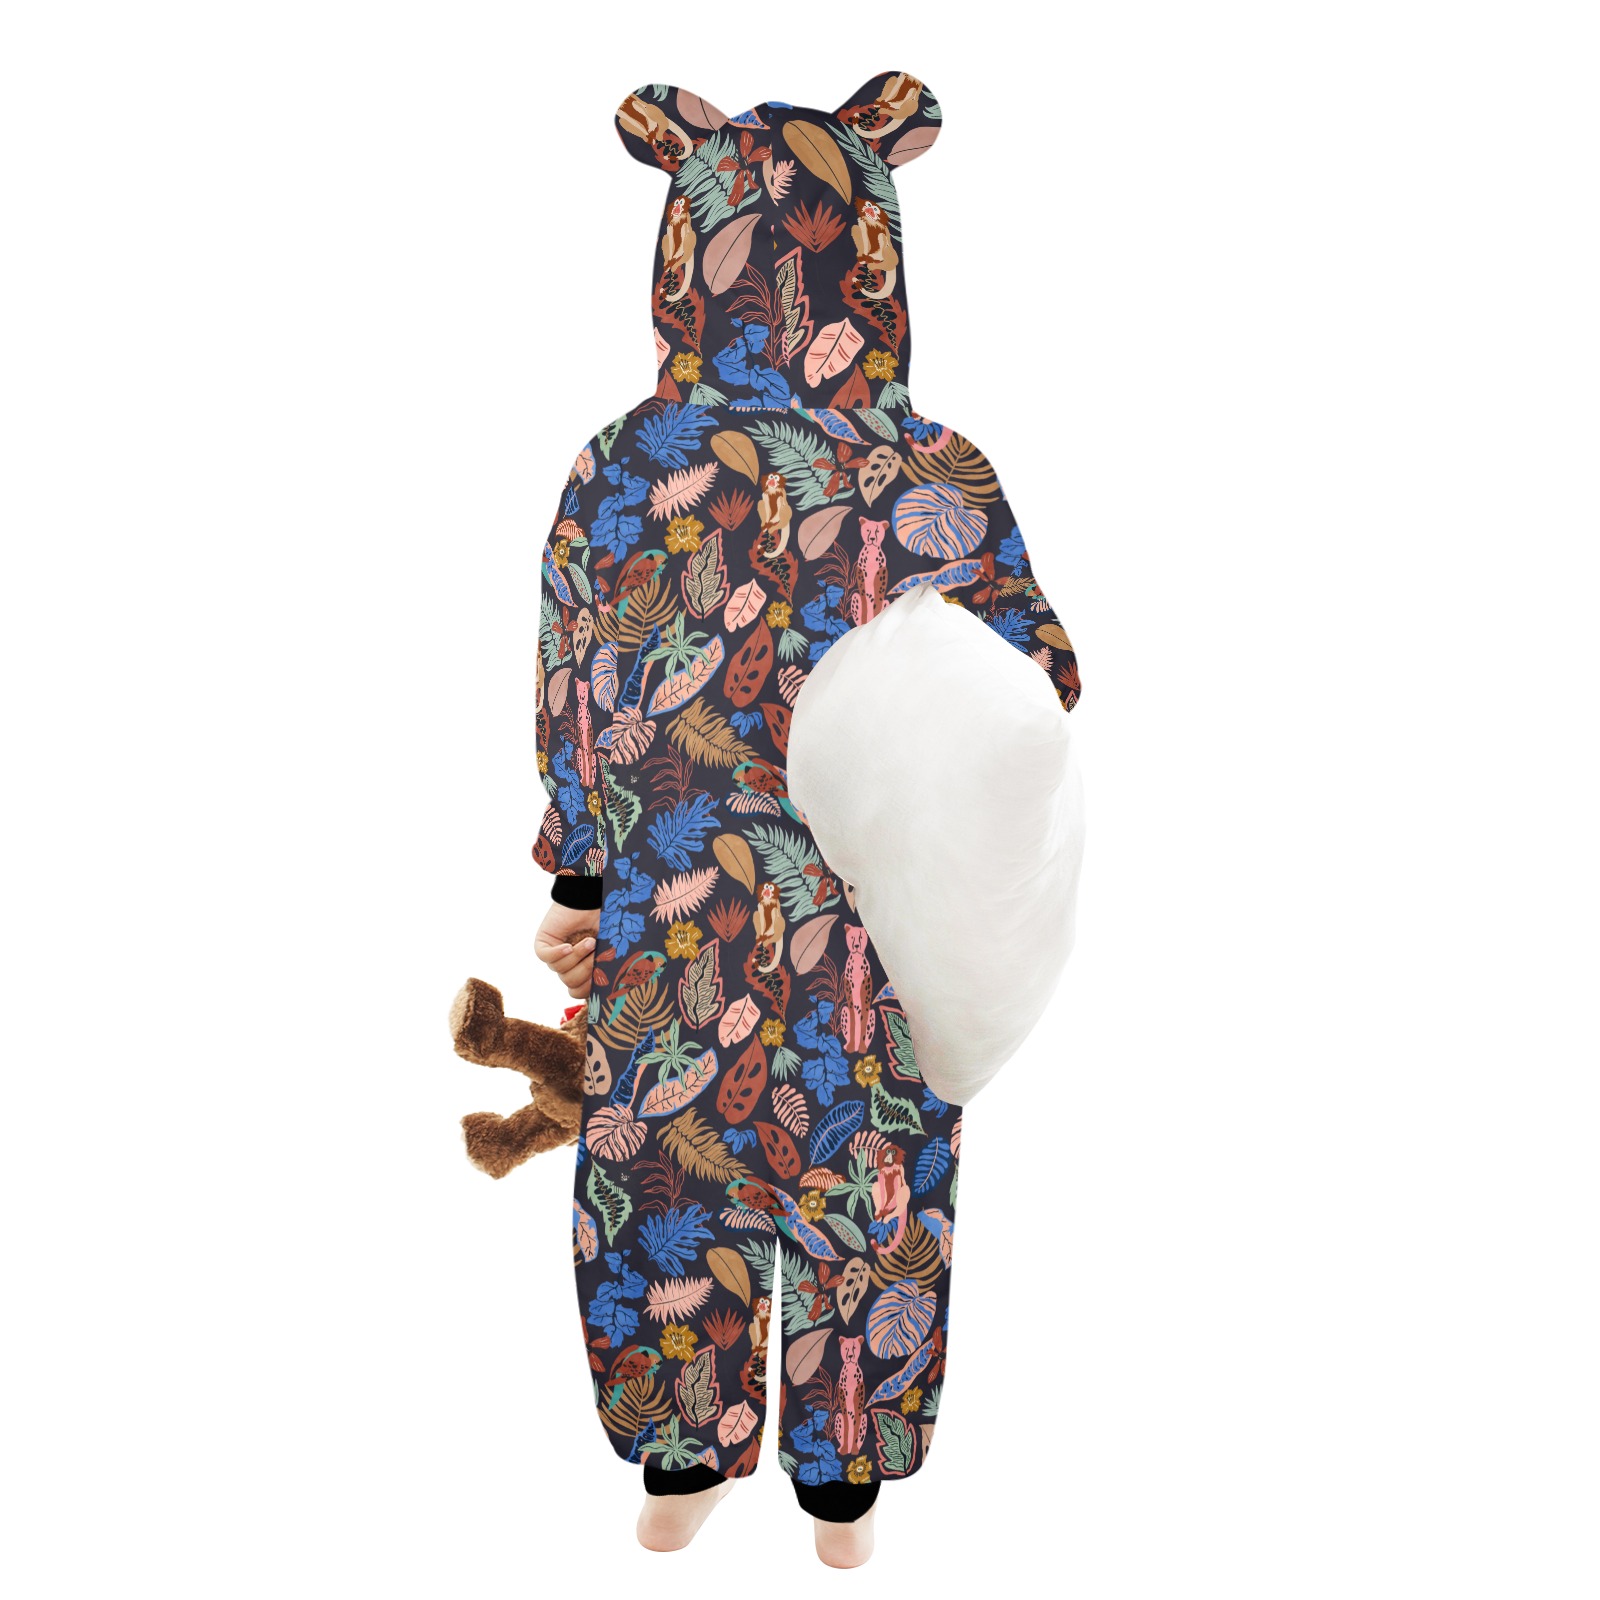 Modern colorful dark jungle 01 One-Piece Zip up Hooded Pajamas for Little Kids